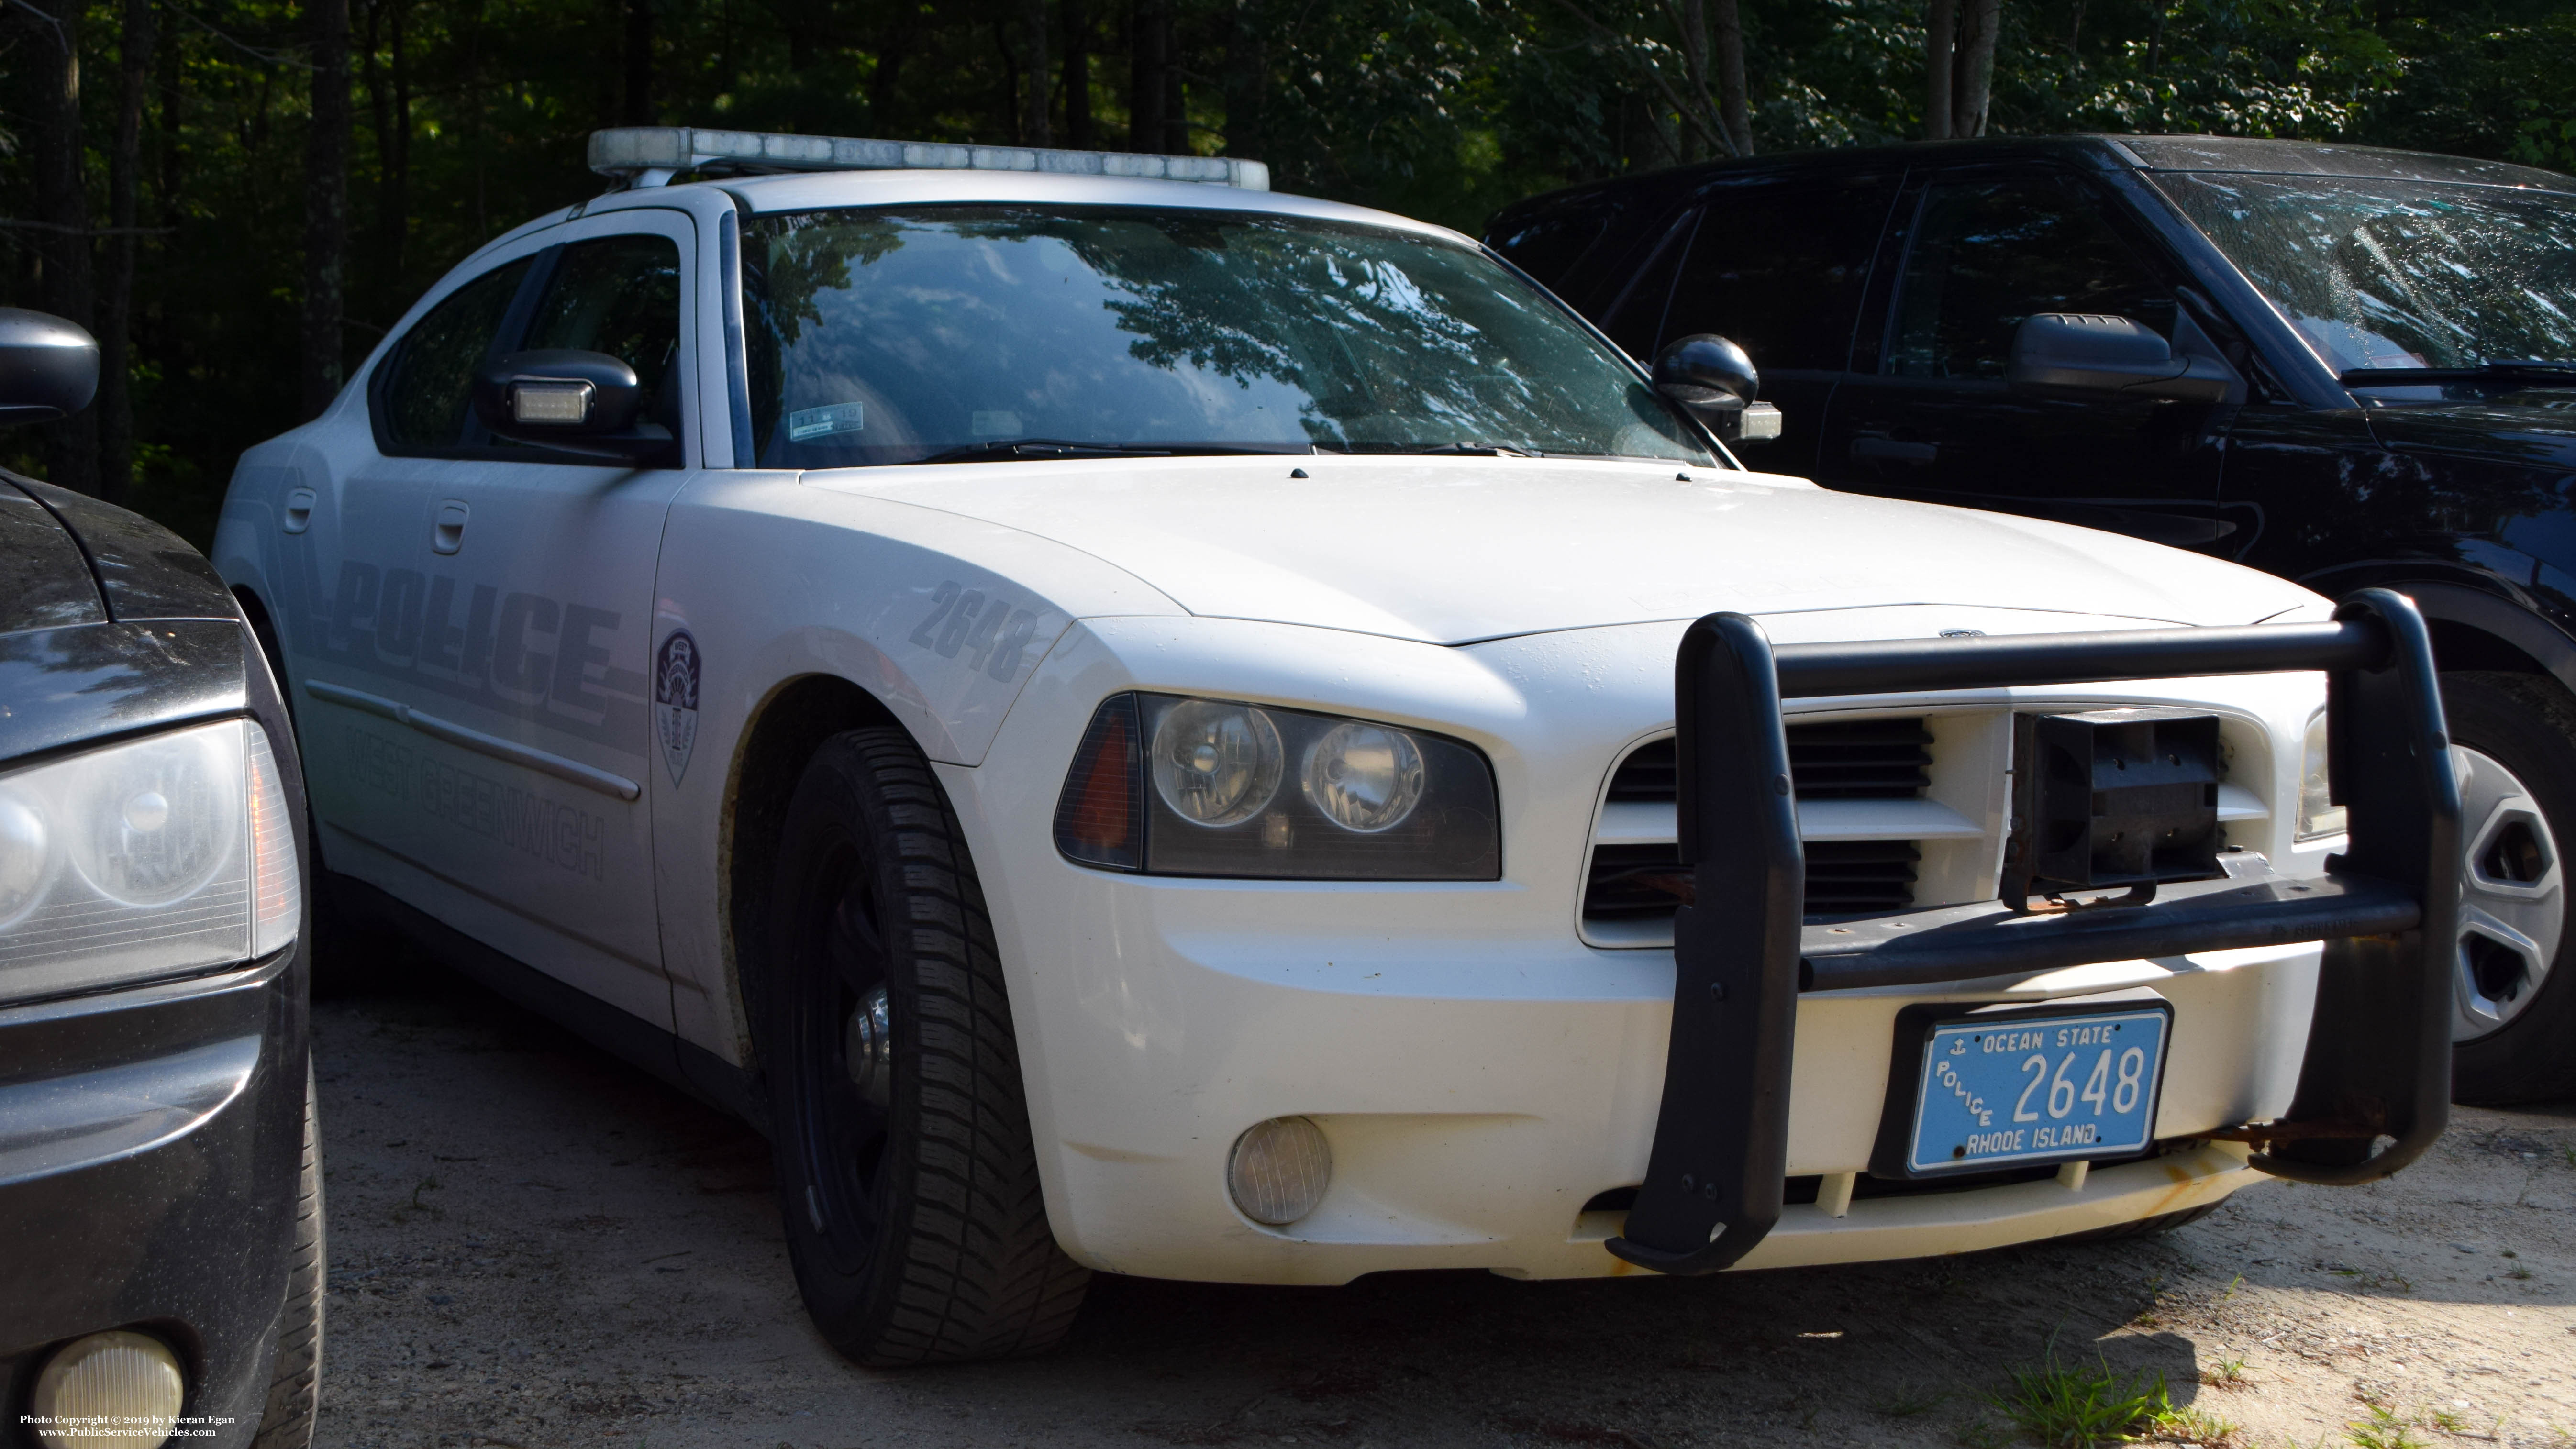 A photo  of West Greenwich Police
            Cruiser 2648, a 2009 Dodge Charger             taken by Kieran Egan